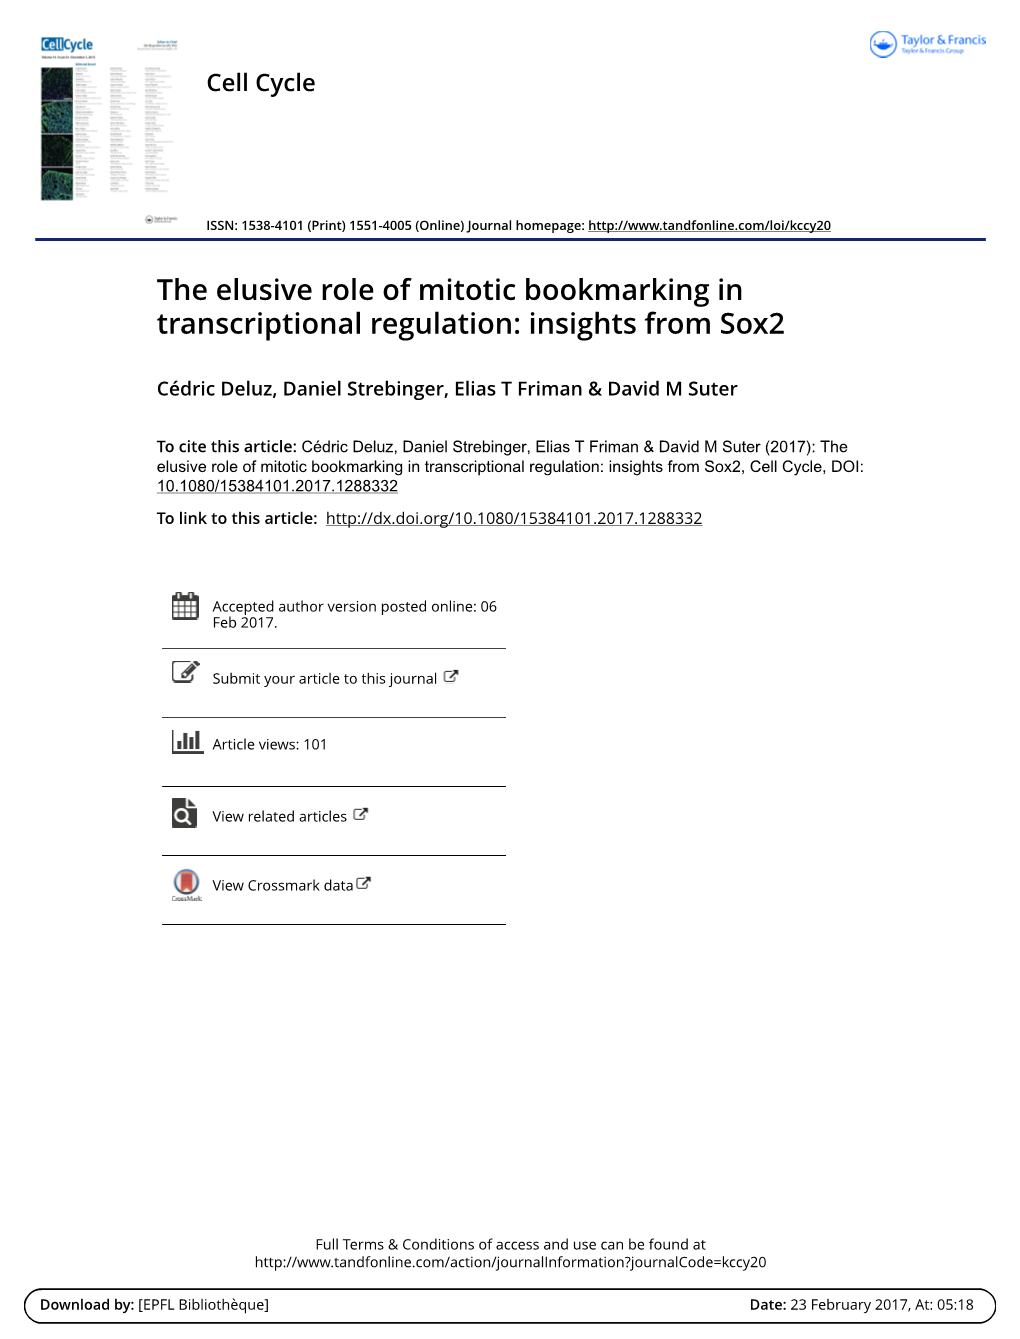 The Elusive Role of Mitotic Bookmarking in Transcriptional Regulation: Insights from Sox2